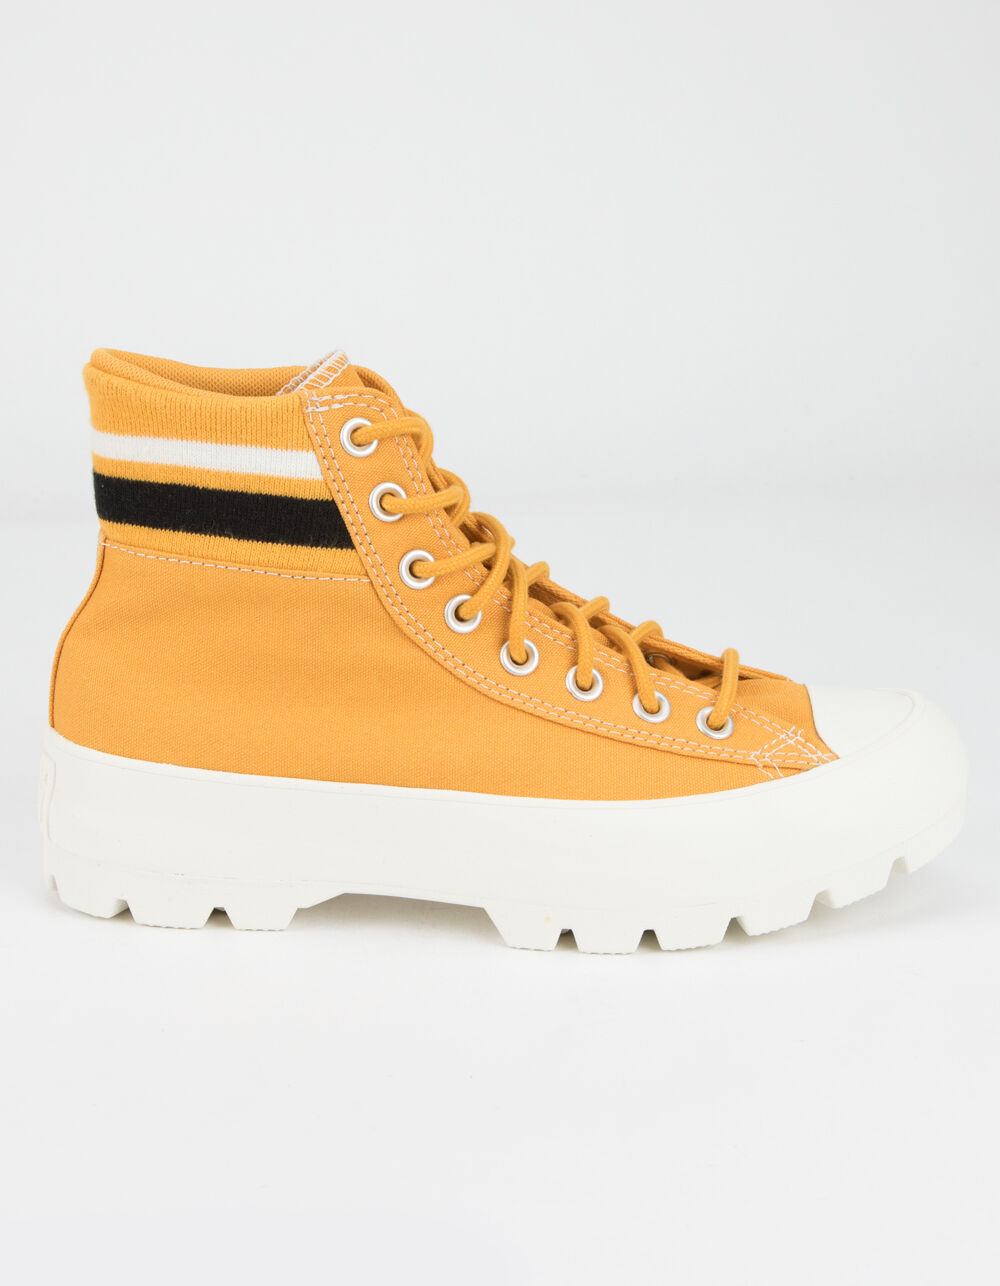 CONVERSE Lugged Varsity Chuck Taylor All Star Womens Yellow High Top Shoes image number 0